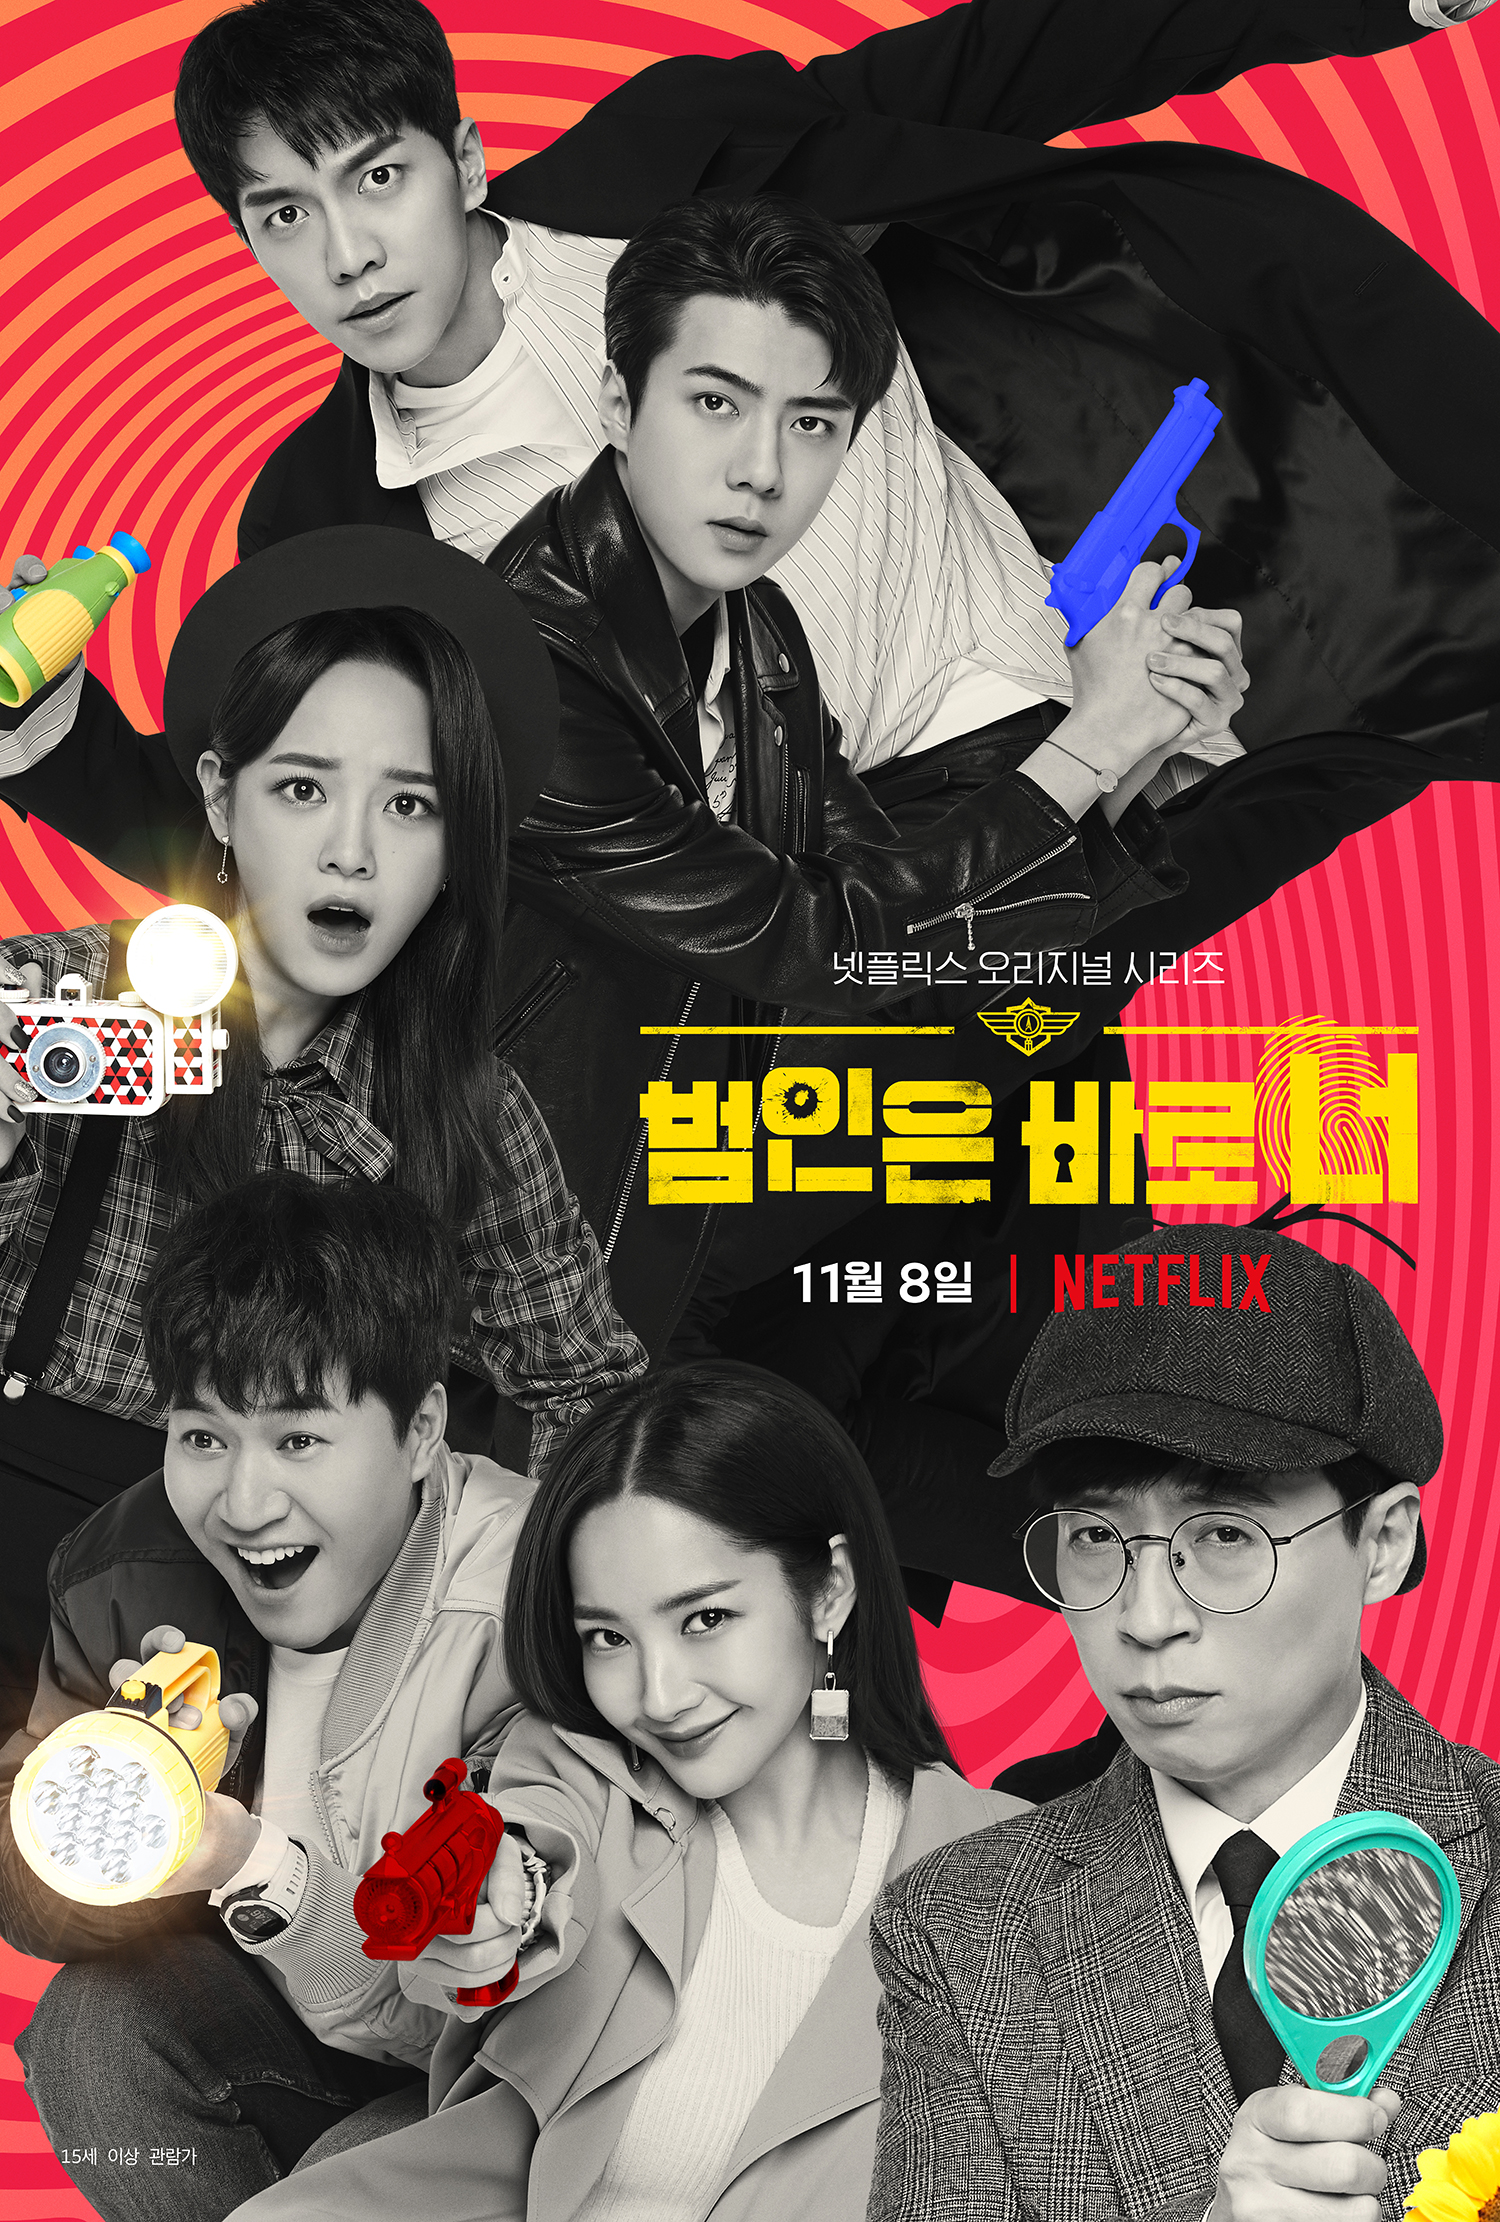 World Digital Marketing Entertainment service Netflix said: The killer is Baro you!The main poster and Teaser trailer for Season 2 are released.The killer is Baro you! Season 2 is Murder, She Wrote is a full-fledged life variety of Monk Dan, who is busy with hands and feet.Season 2 features new events that Yoo Jae-Suk, who disappeared from last seasons final episode, brought together an old colleague in a year and at the same time, when national team Heo Dang Lee Seung-gi joined the Monk team, which led them to face.The main poster, which was released on the 18th, is the first year of the return, including the eldest brother Monk Yoo Jae-Suk, the sharp Murder, She Wrote, Park Min-young, the wrong fool genius Kim Jong-min, It boasts a lineup of all-time lineups to Lee Seung-gi, a new member of the The Monk, who was reunited in a year, gives a stronger smile with chemistry, which is even stronger than last season, and Murder, She Wrote, which are ahead of the head.The killer is Baro! Season 2 will visit World viewers on November 8th.